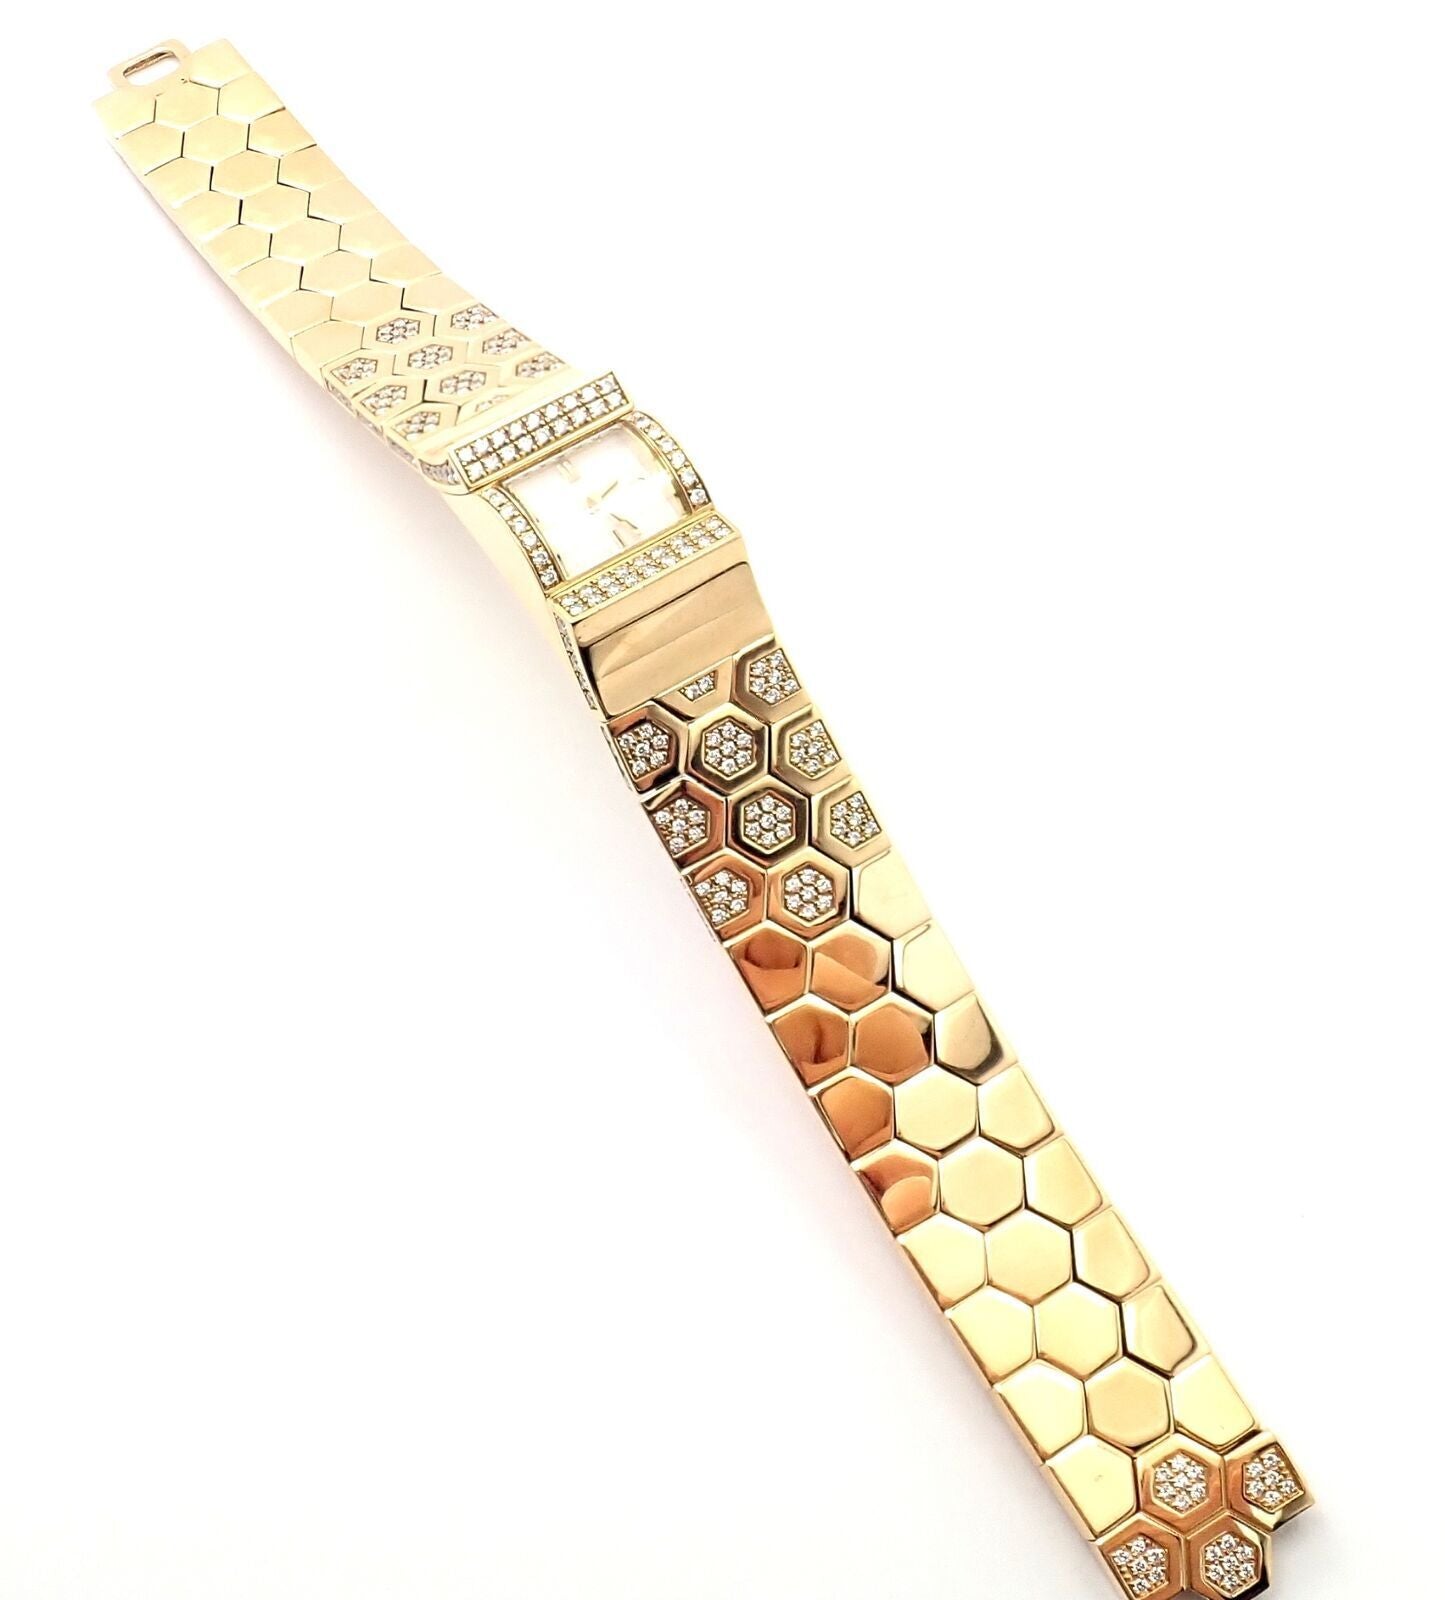 Van Cleef & Arpels Jewelry & Watches:Watches, Parts & Accessories:Watches:Wristwatches Authentic! Van Cleef & Arpels Ludo Swann 18k Yellow Gold Diamond Watch Papers